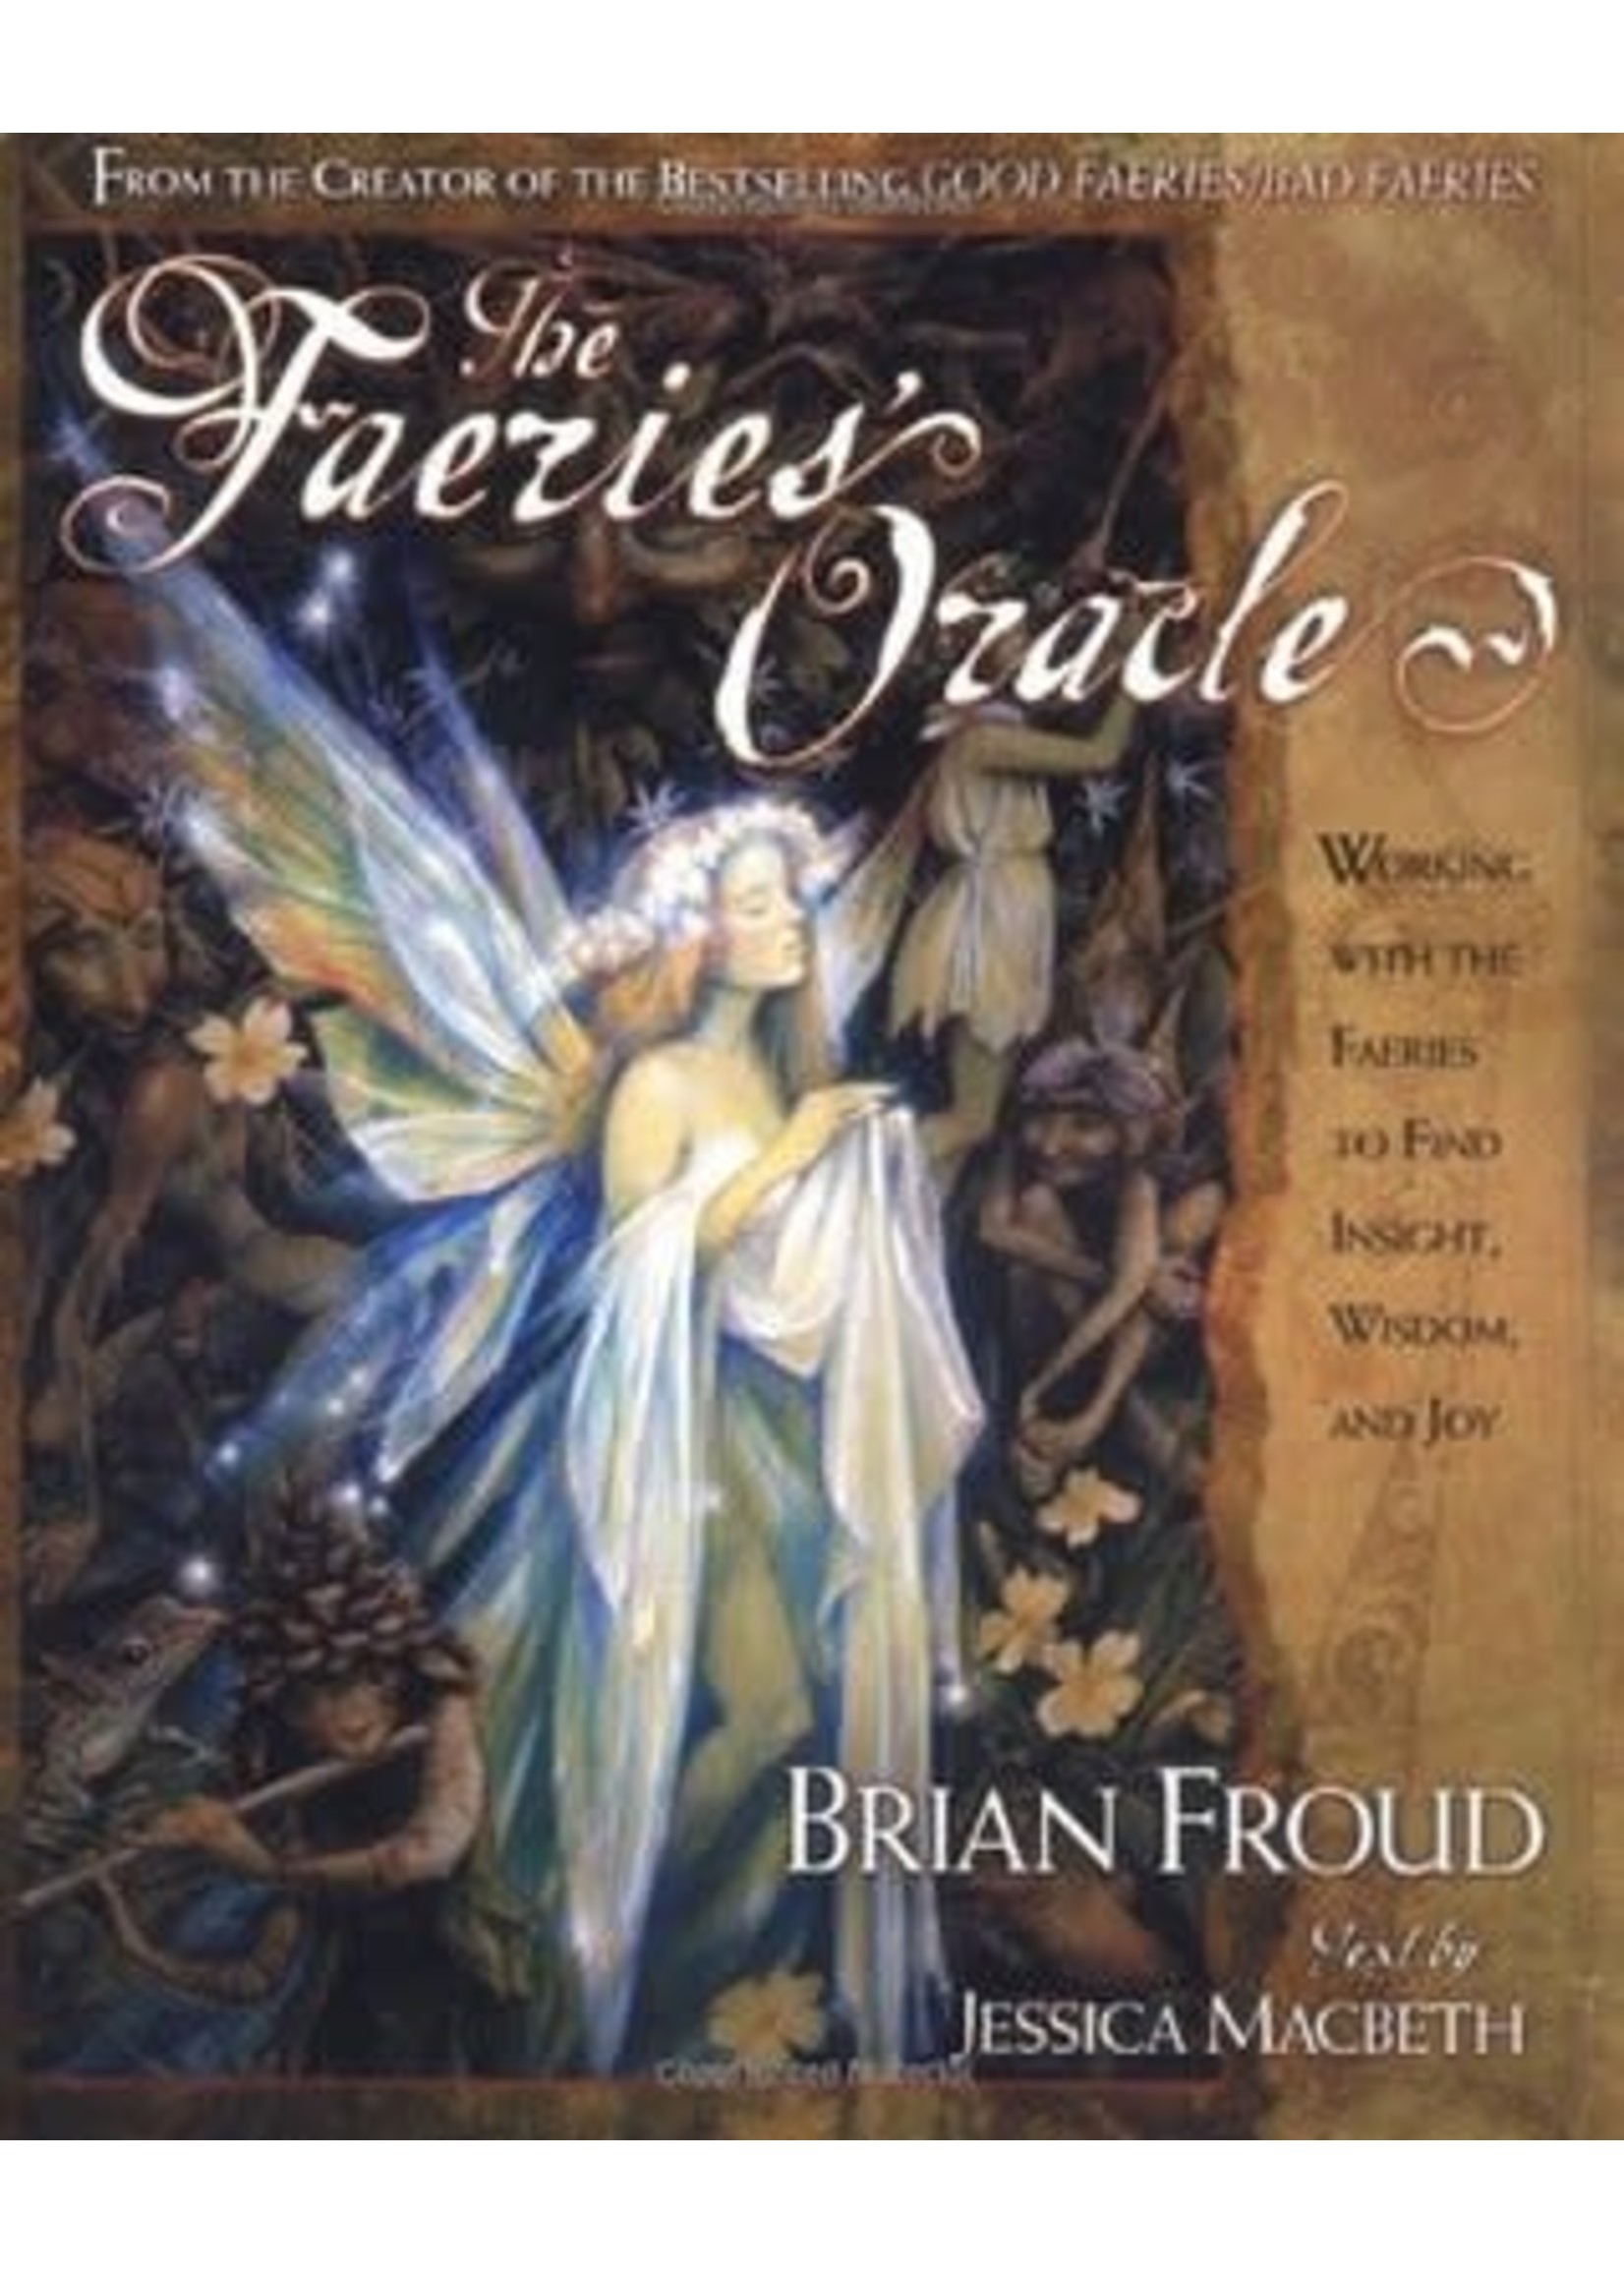 The Faeries' Oracle by Brian Froud, Jessica Macbeth